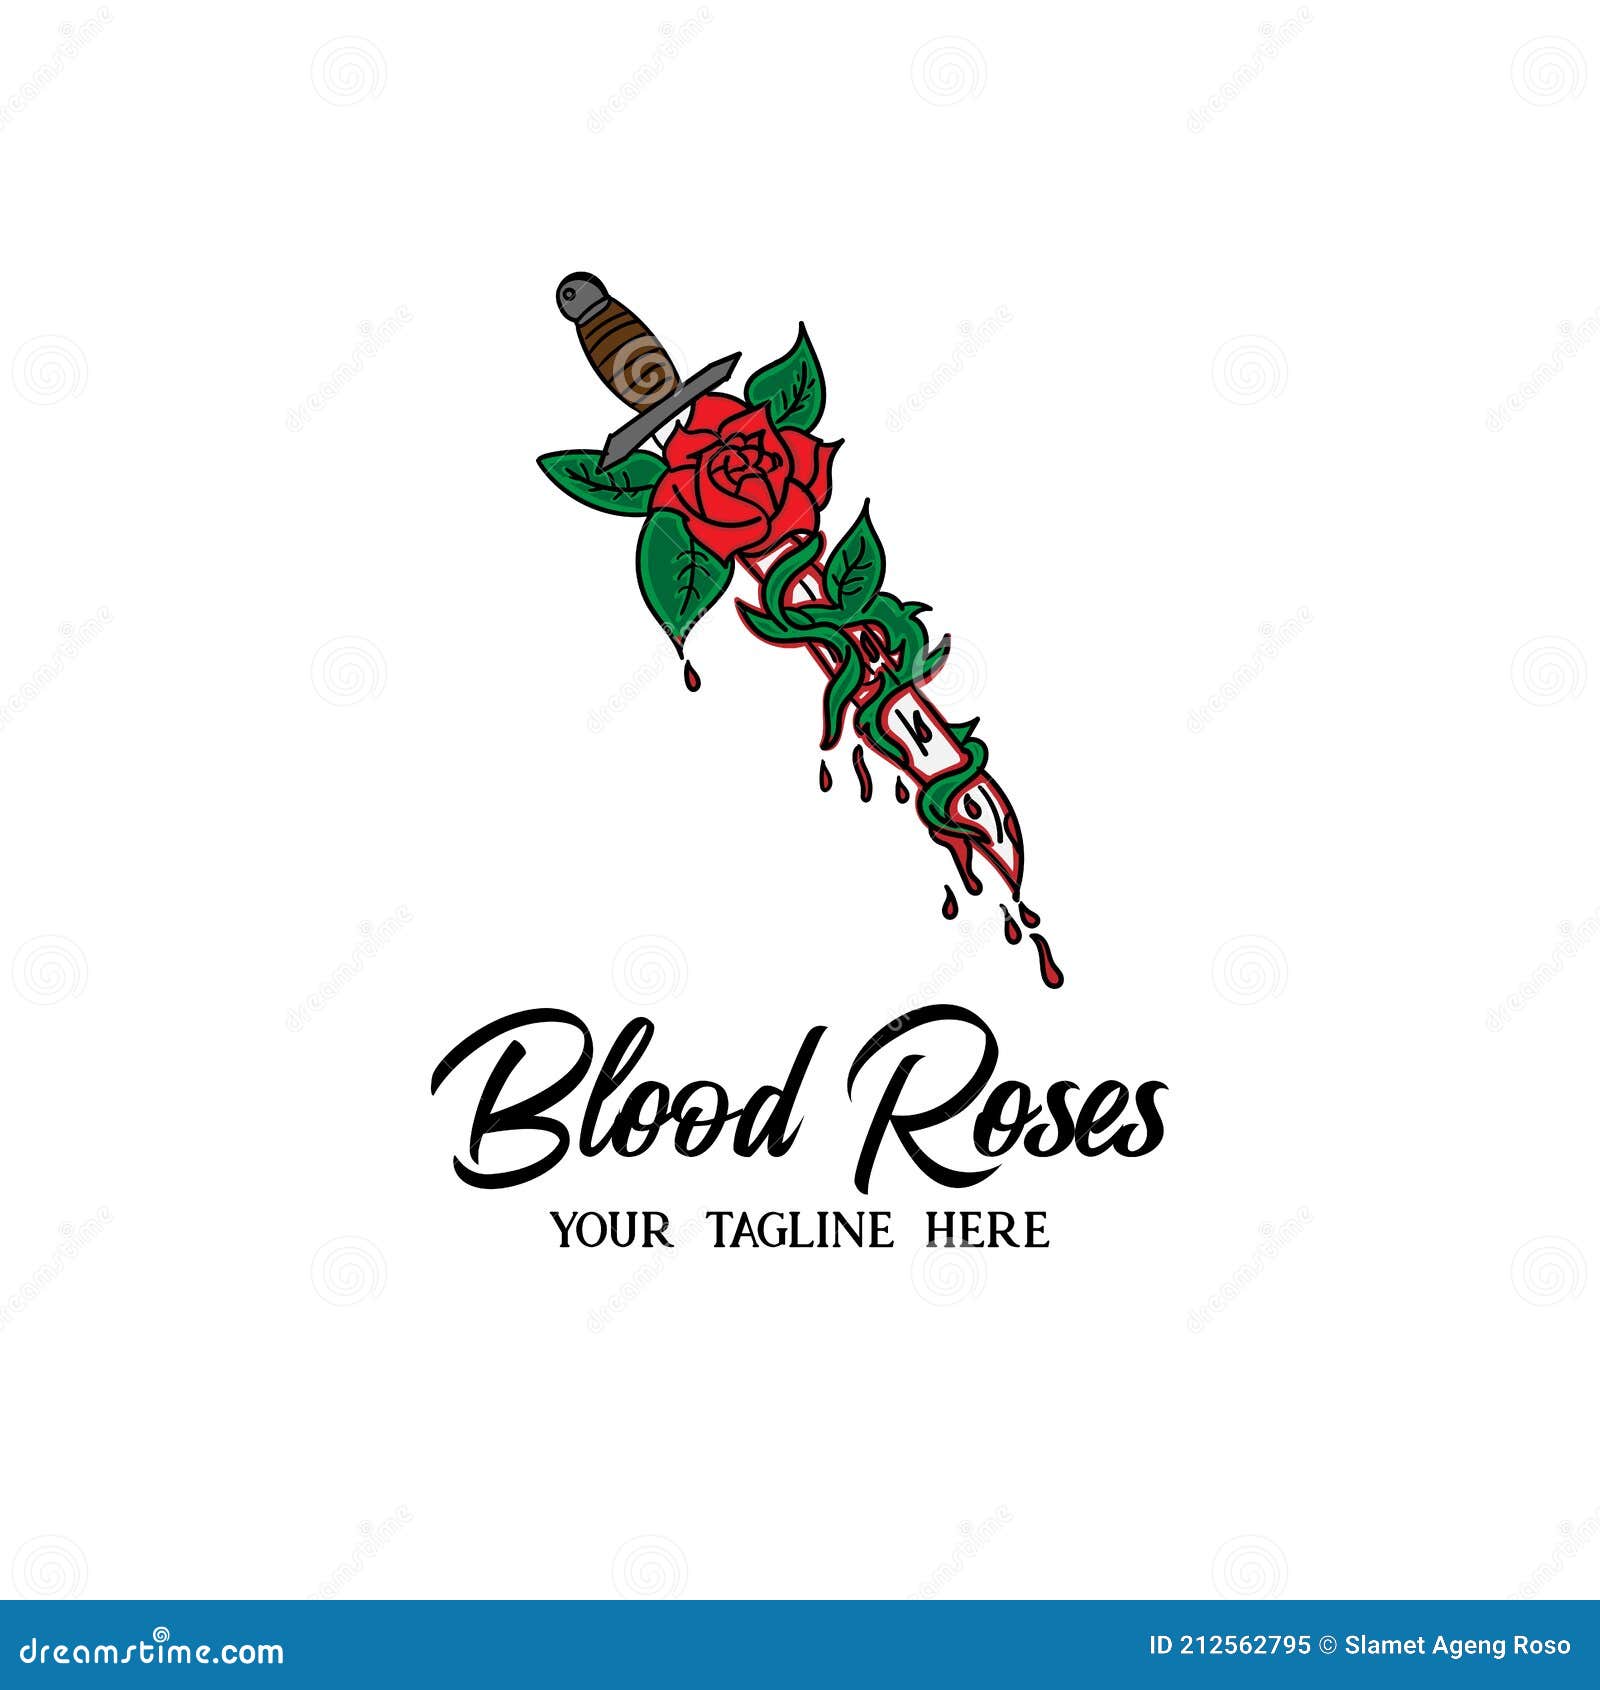 Sword and Roses Tattoo by Keepermilio on DeviantArt